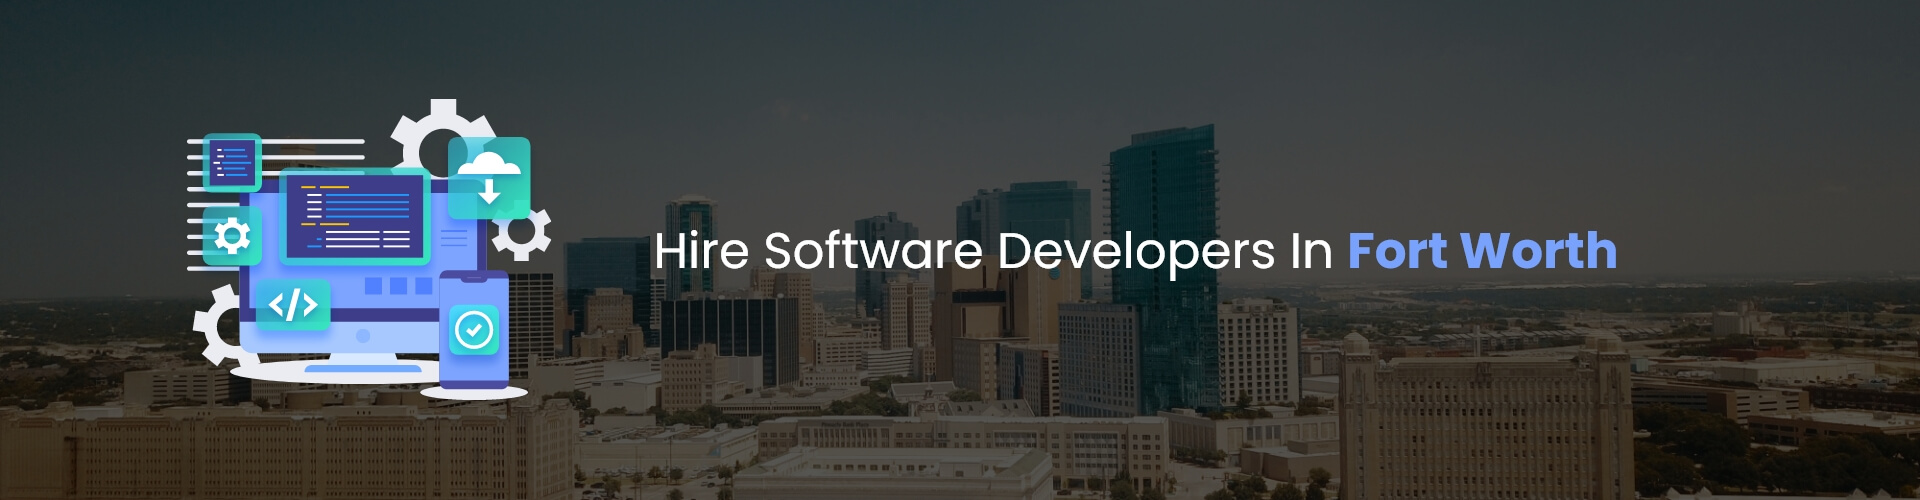 hire software developers in fort worth